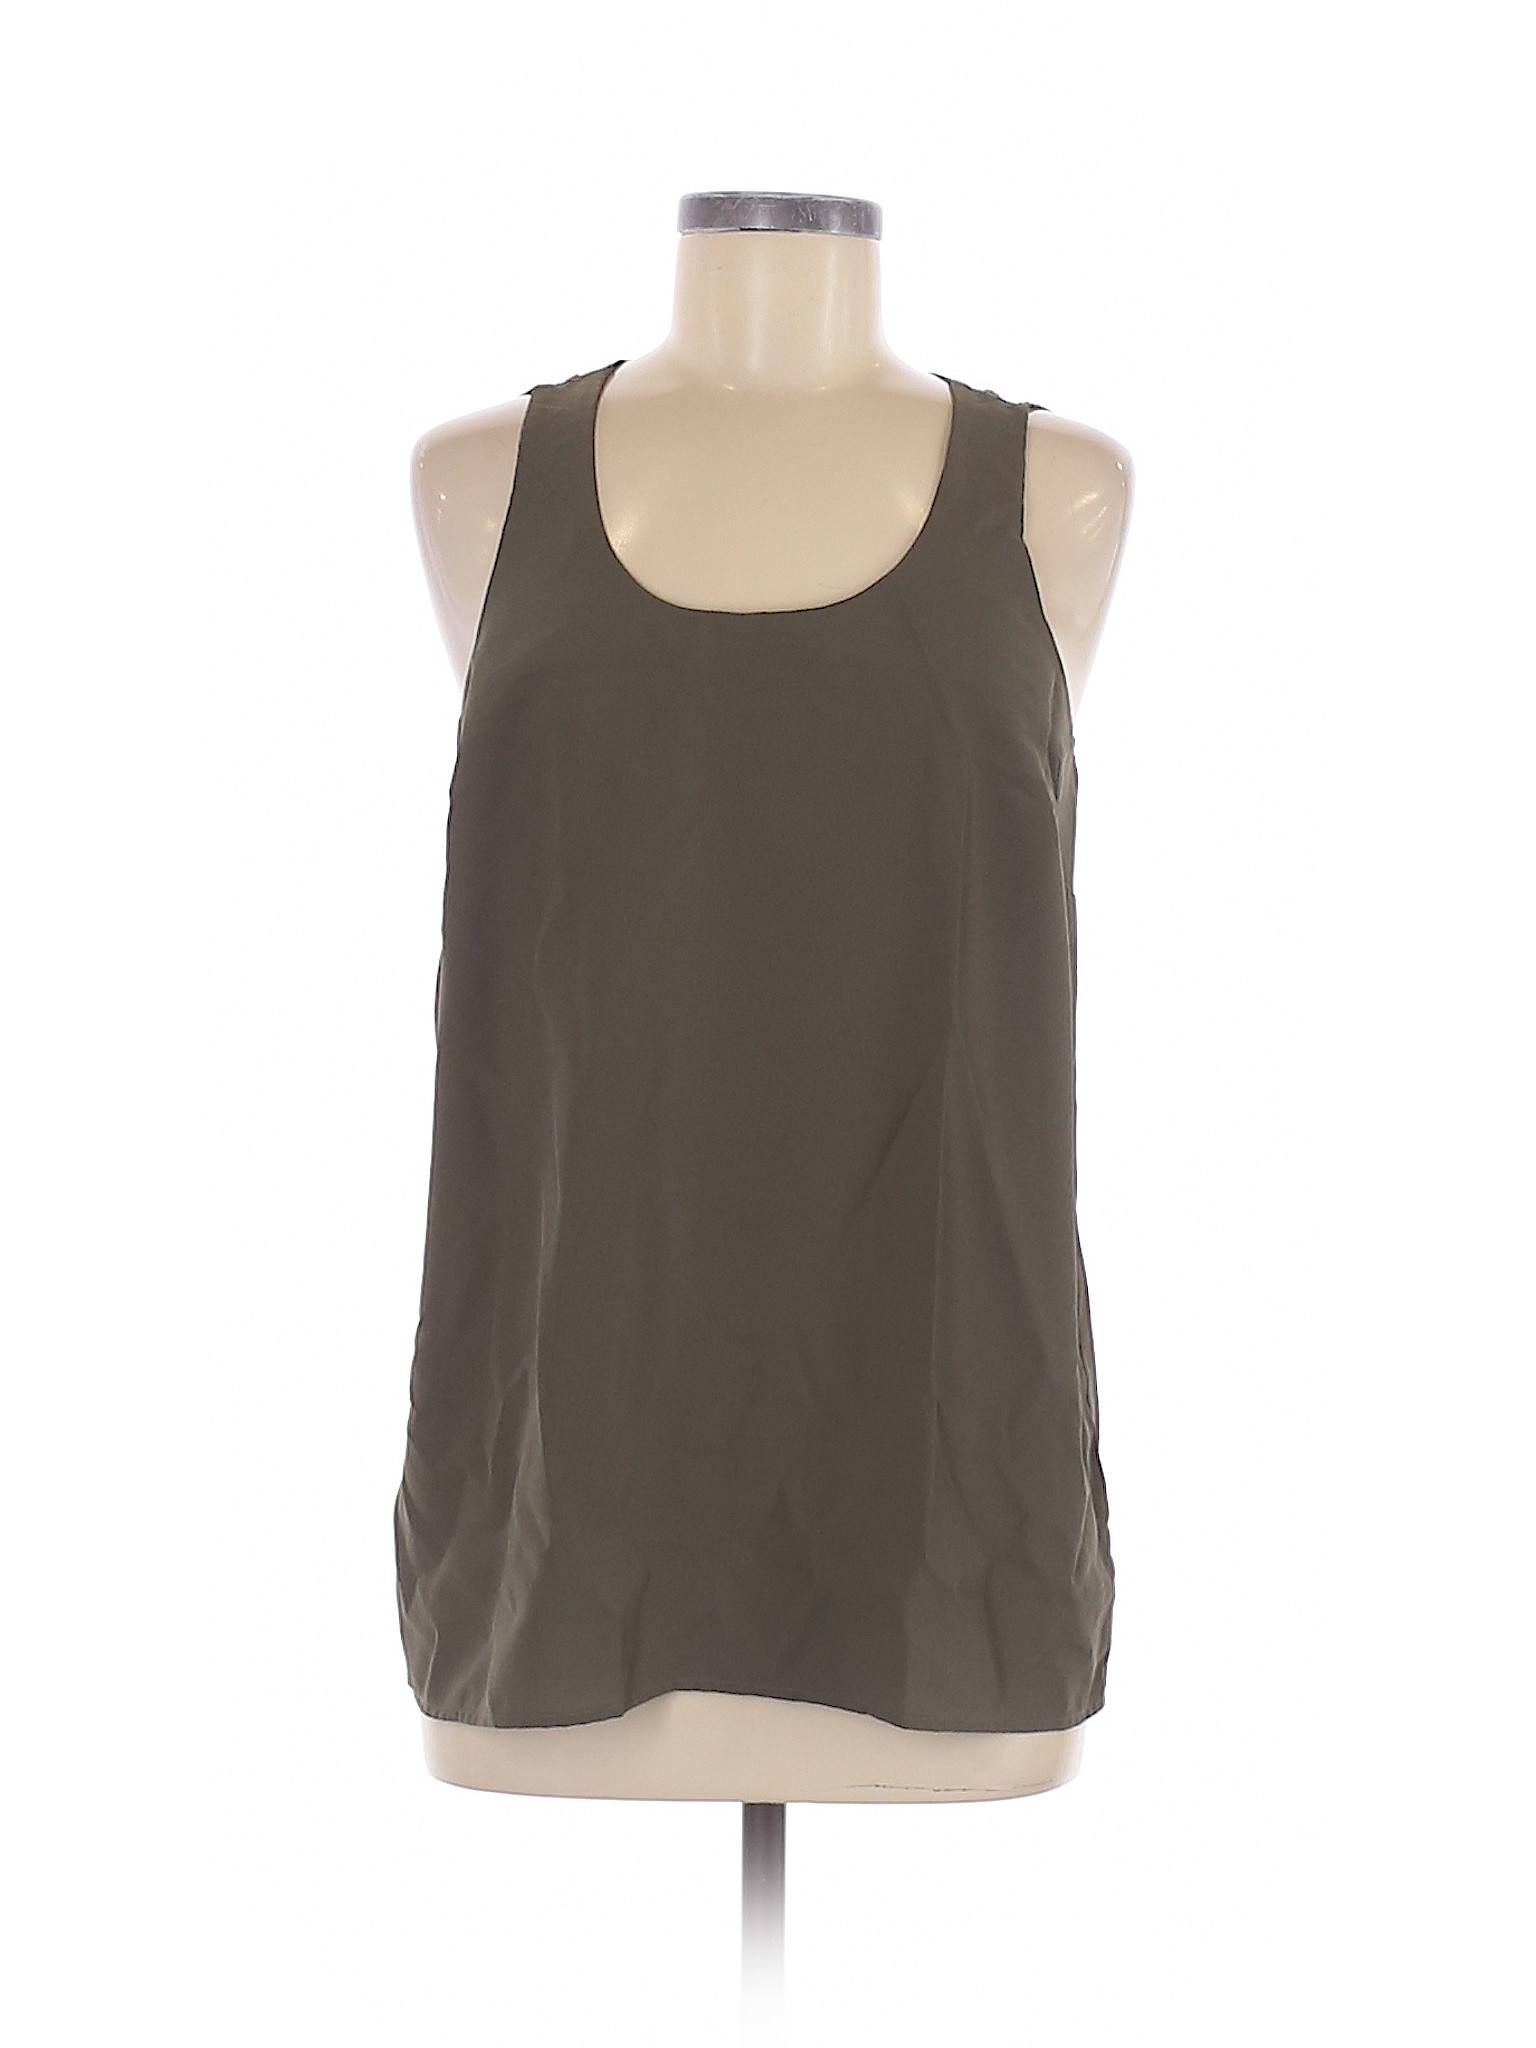 The Limited Women Brown Sleeveless Blouse M | eBay